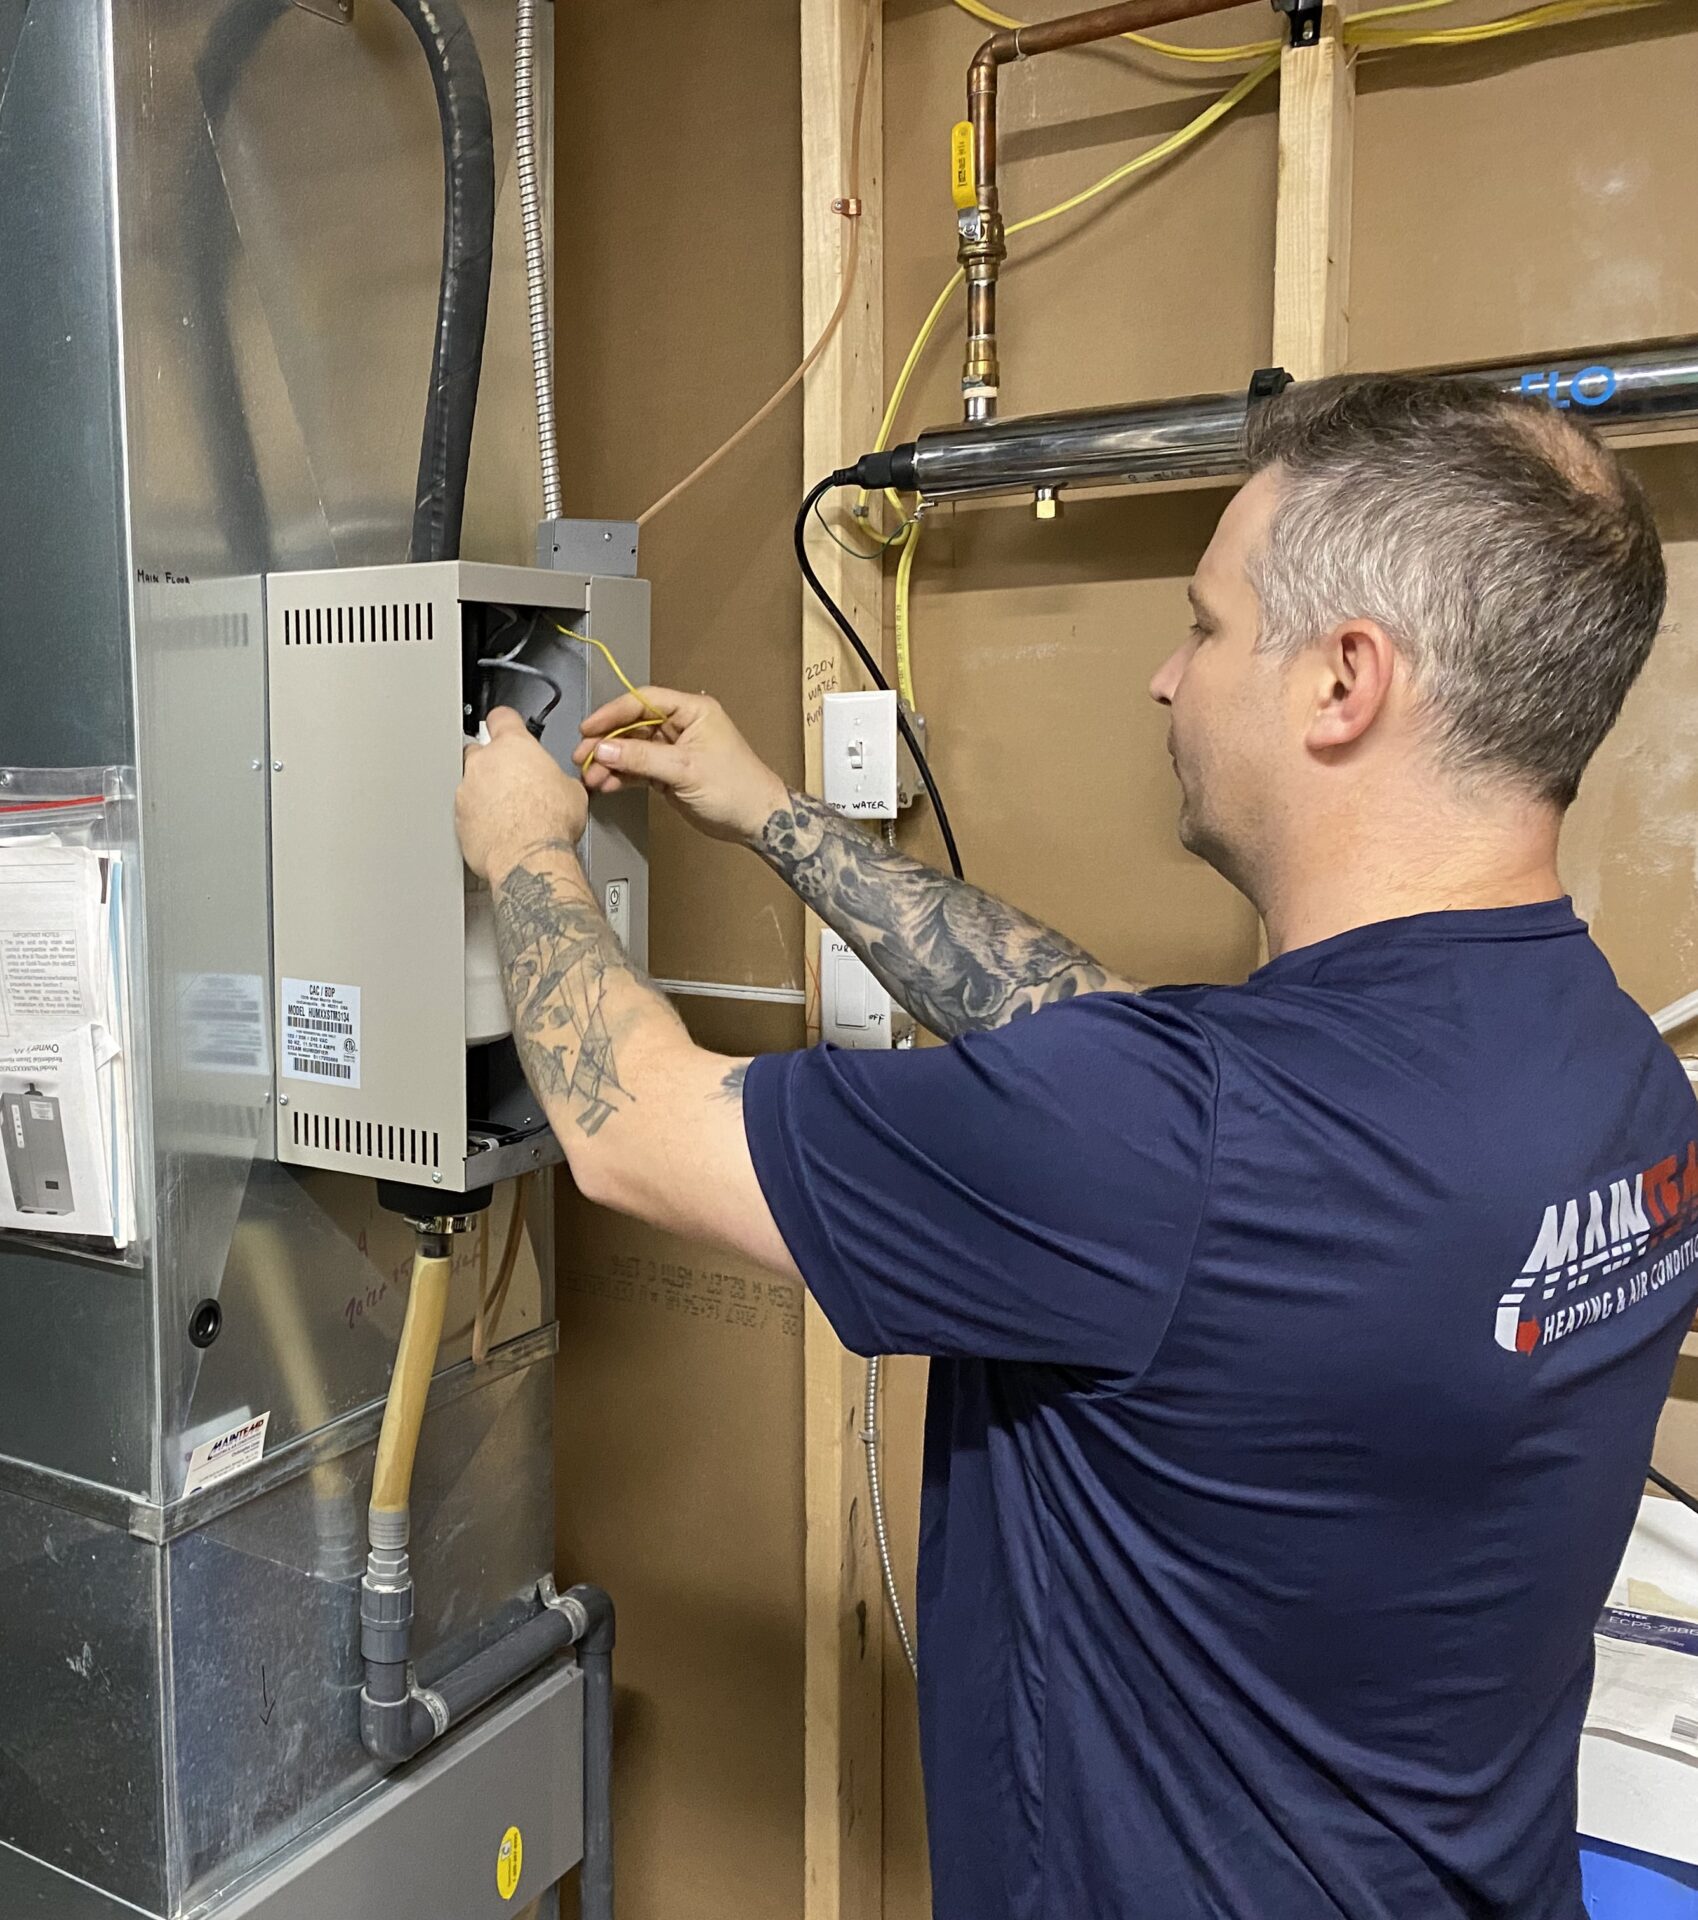 A person with tattoos is working on an electrical panel next to an HVAC system in a utility room, wearing a blue company shirt.